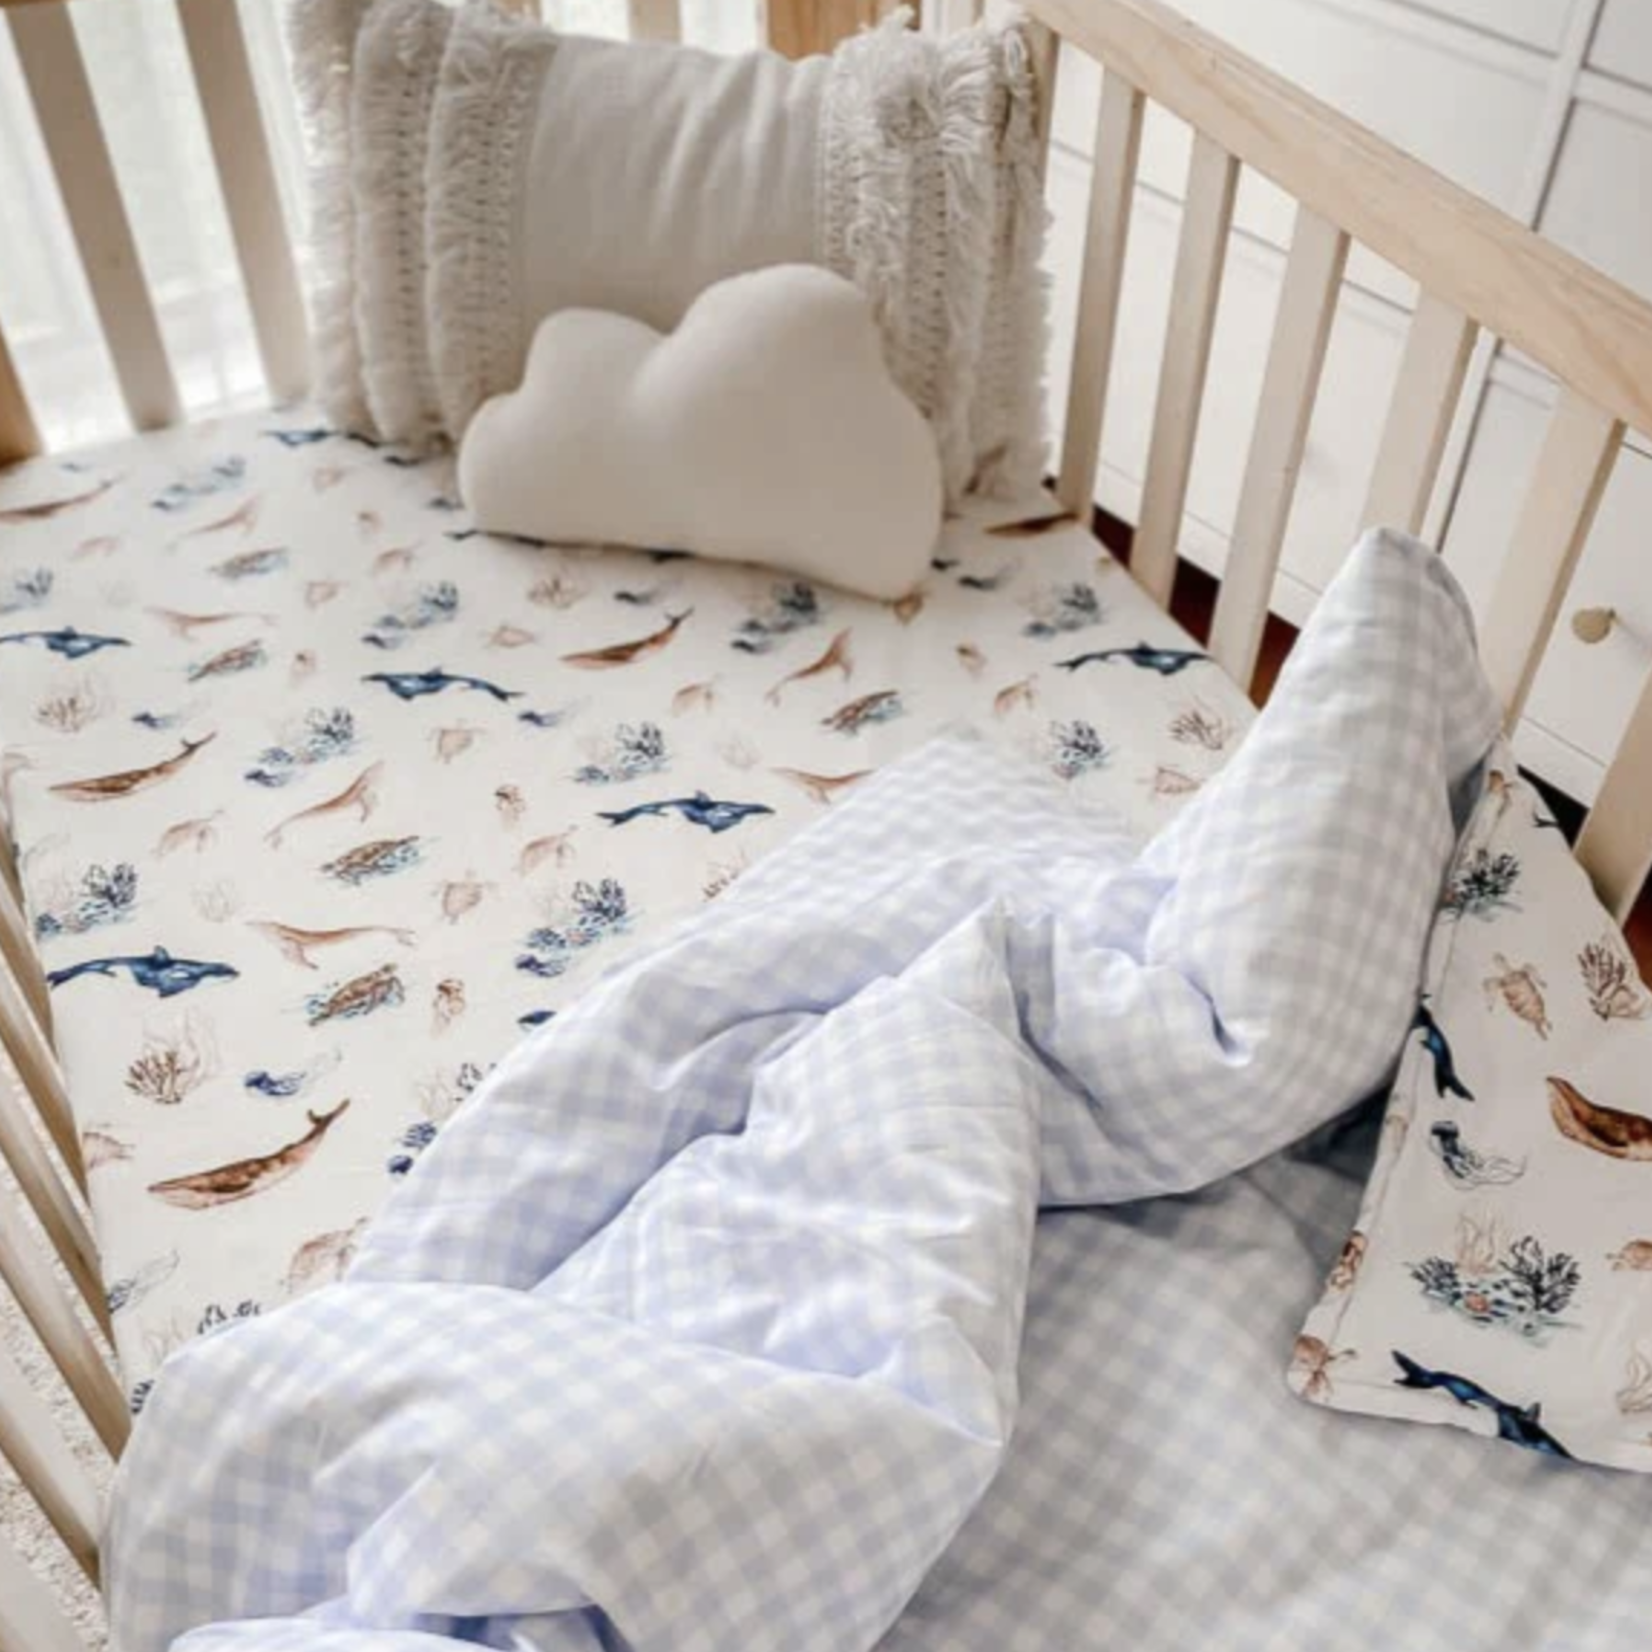 Snuggly Jacks Ocean Fall Fitted Cot Sheet